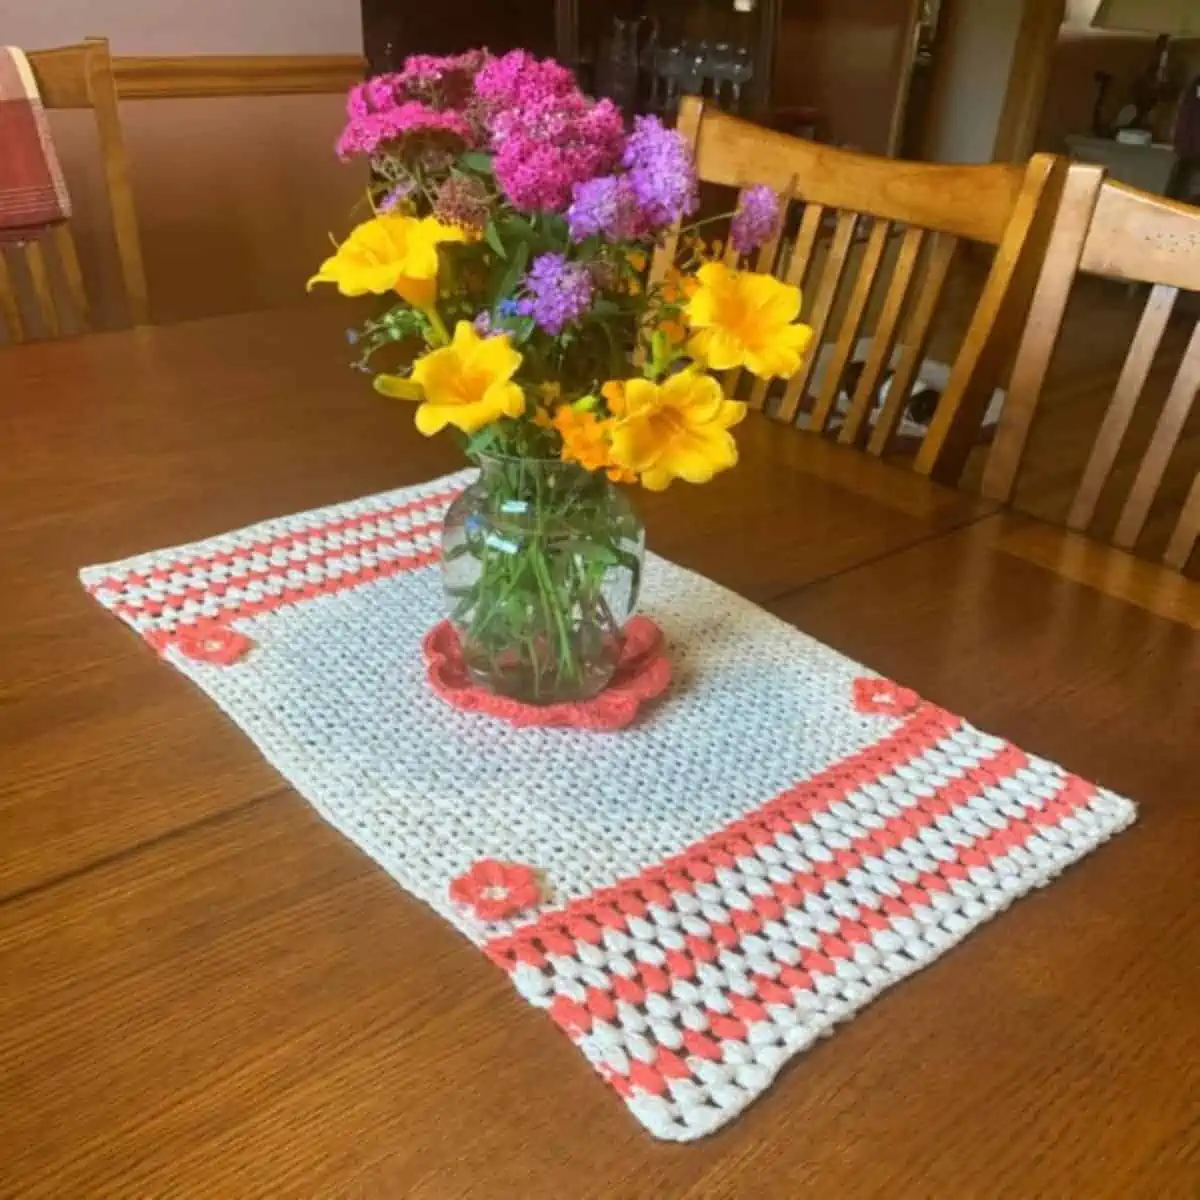 small crochet placemat as a centerpiece with flowers